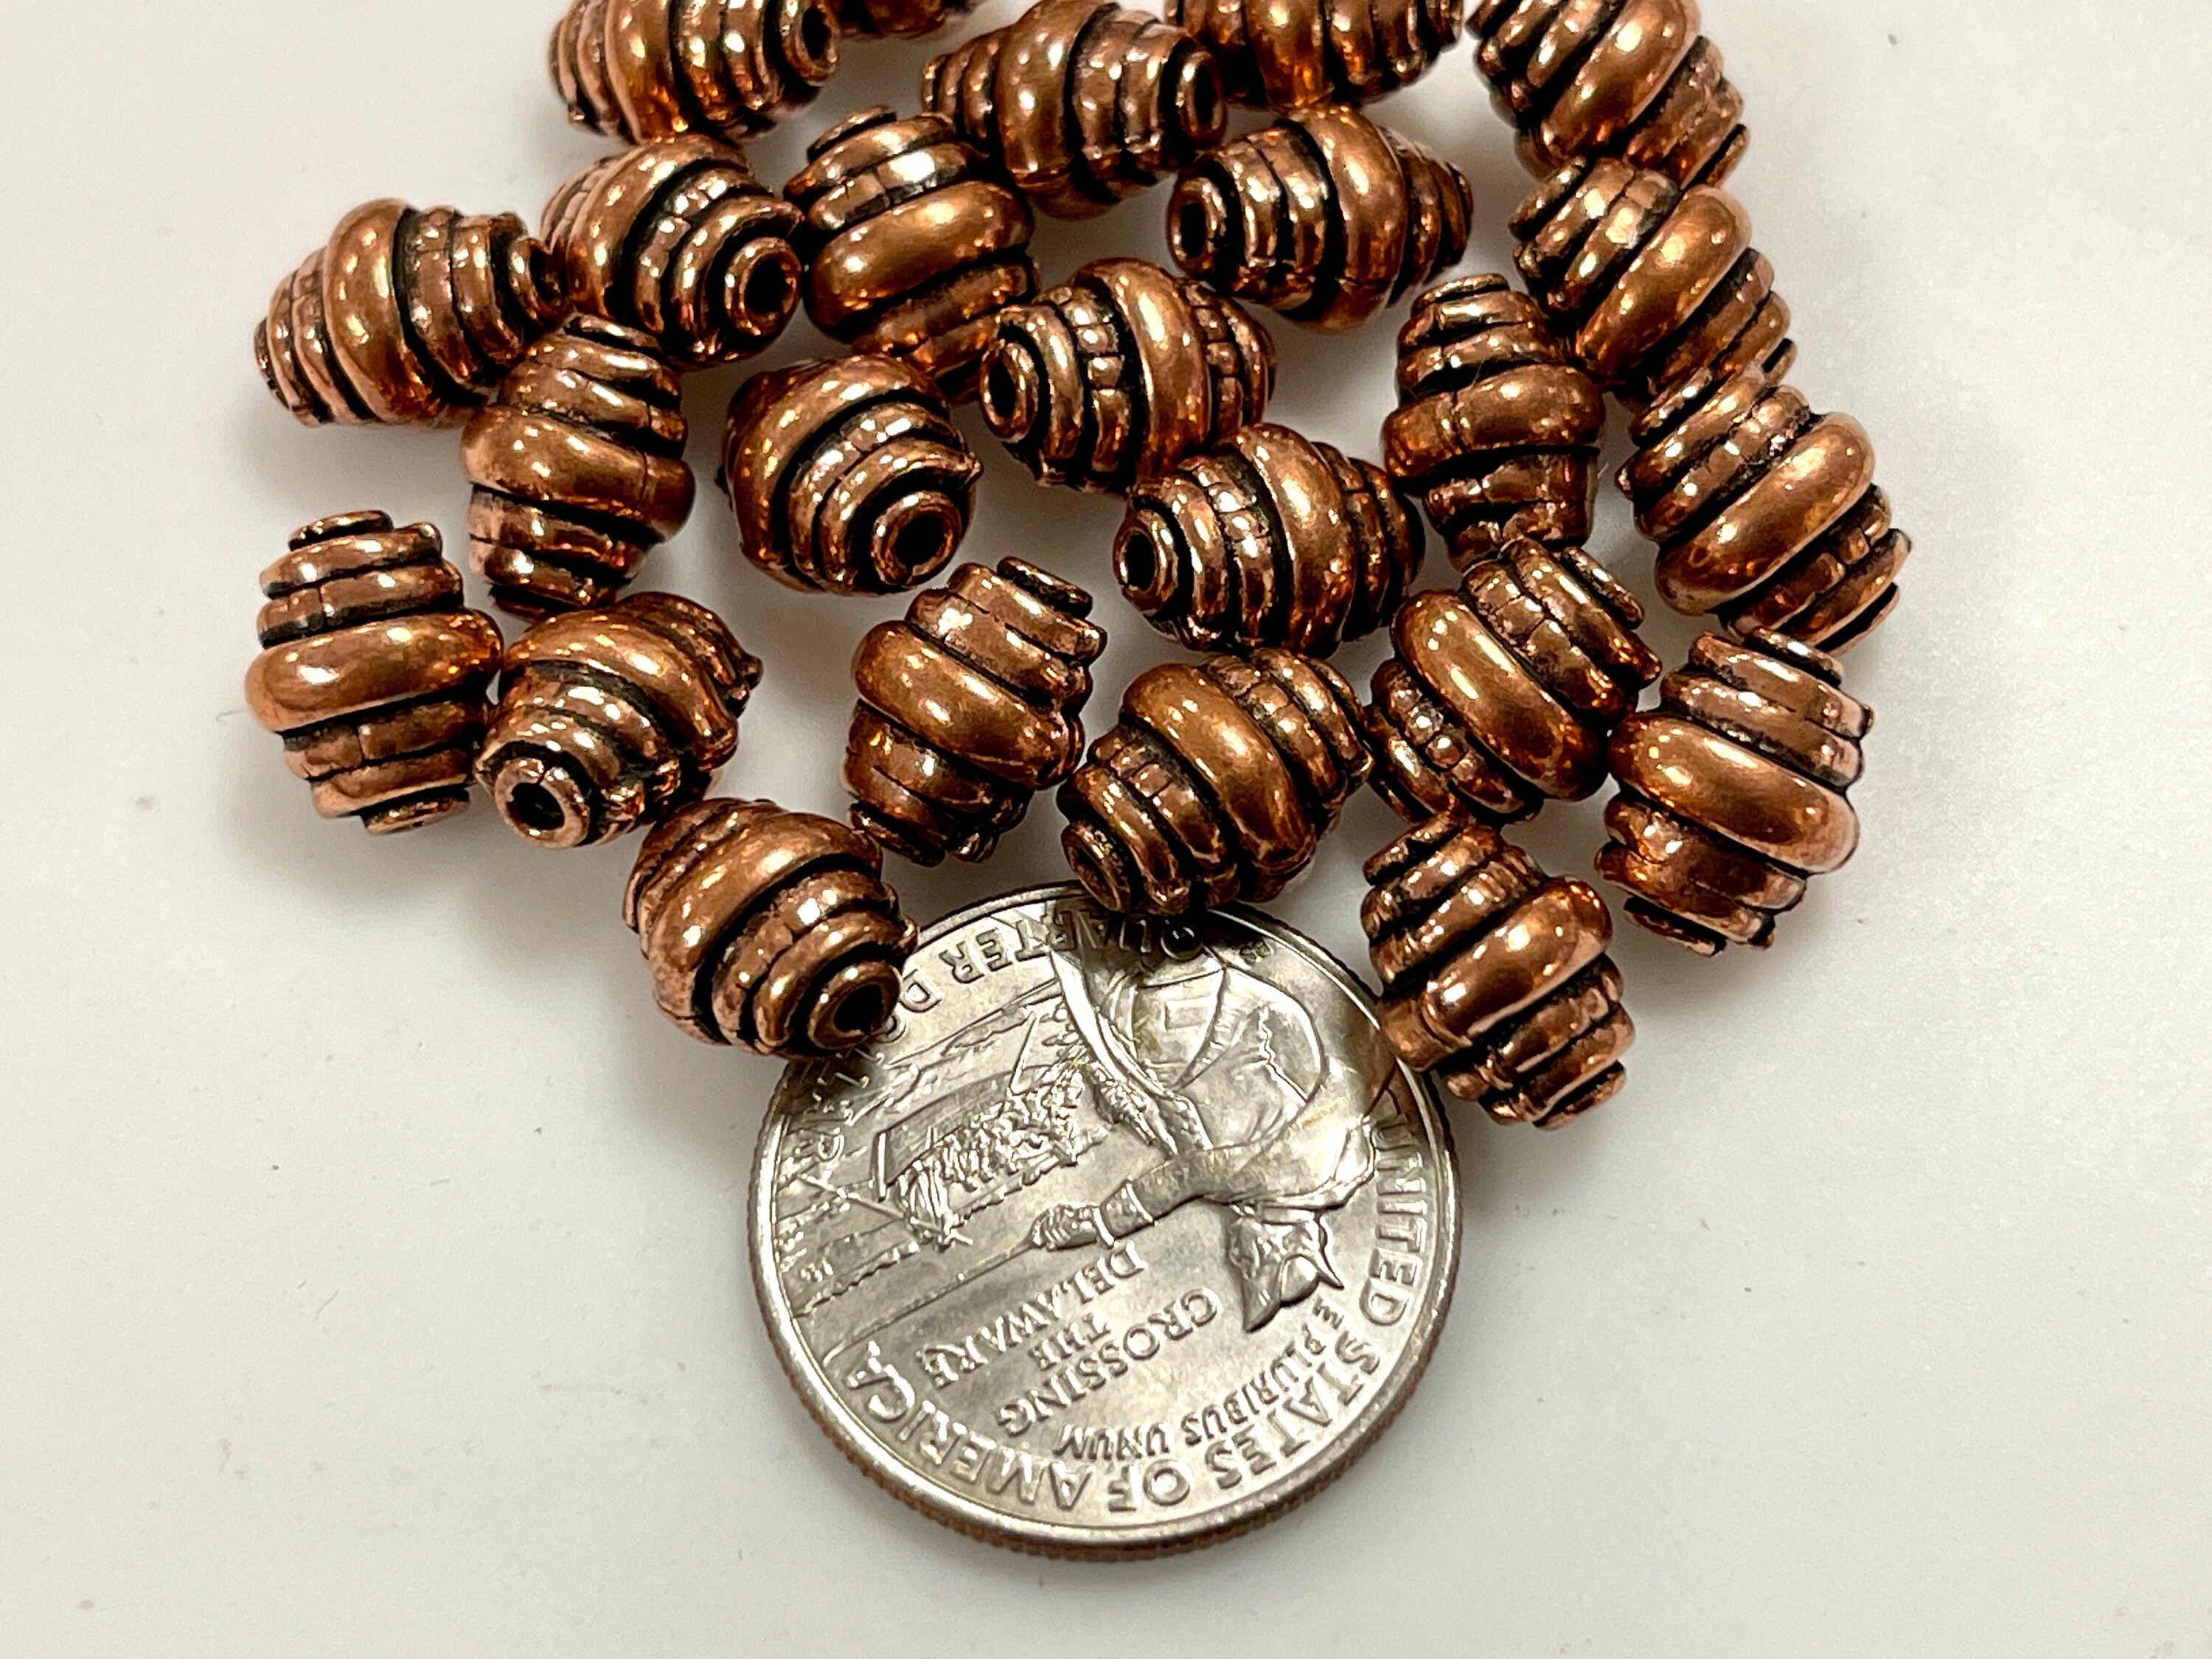 Copper Bali Beads, Solid Copper Beads, Copper Spacer Beads, Oxidized copper  Bead